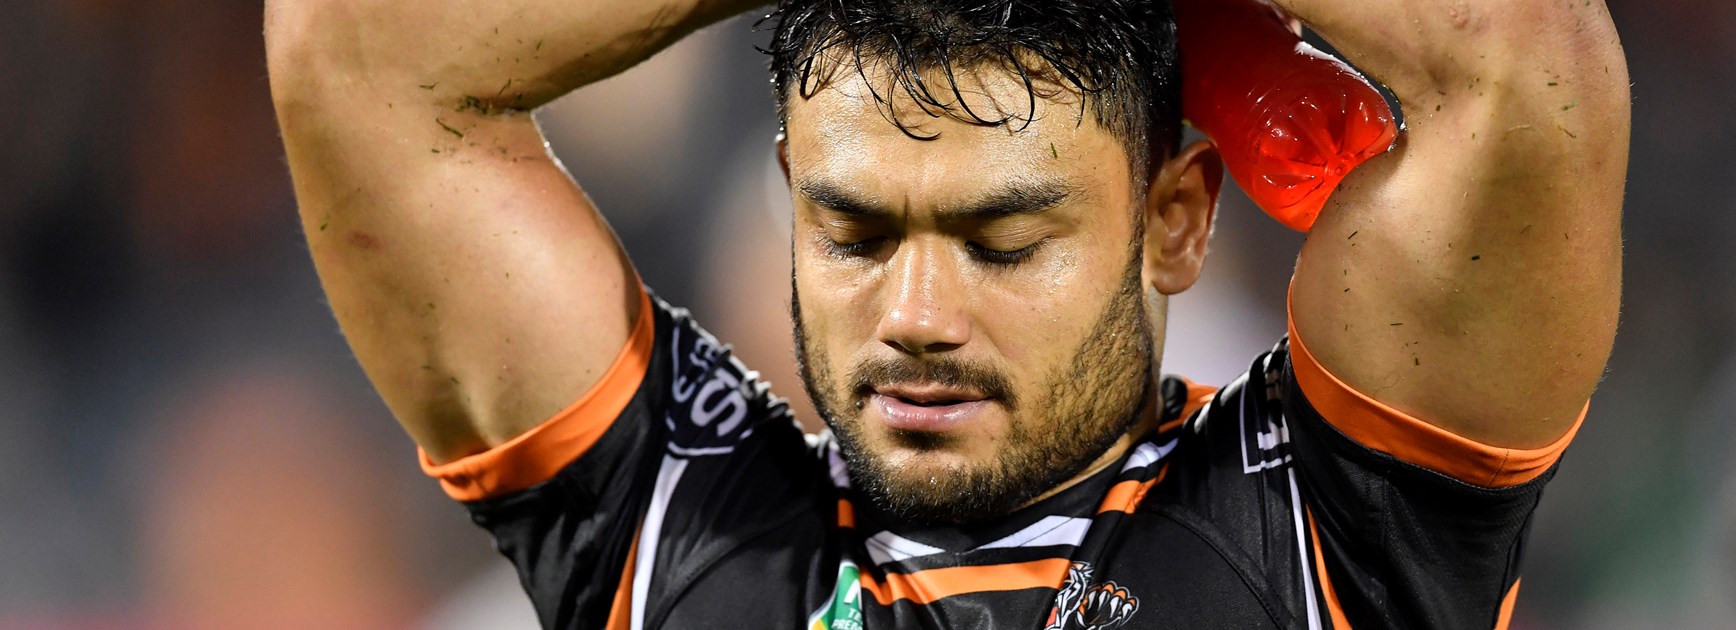 Wests Tigers Results: Round 3